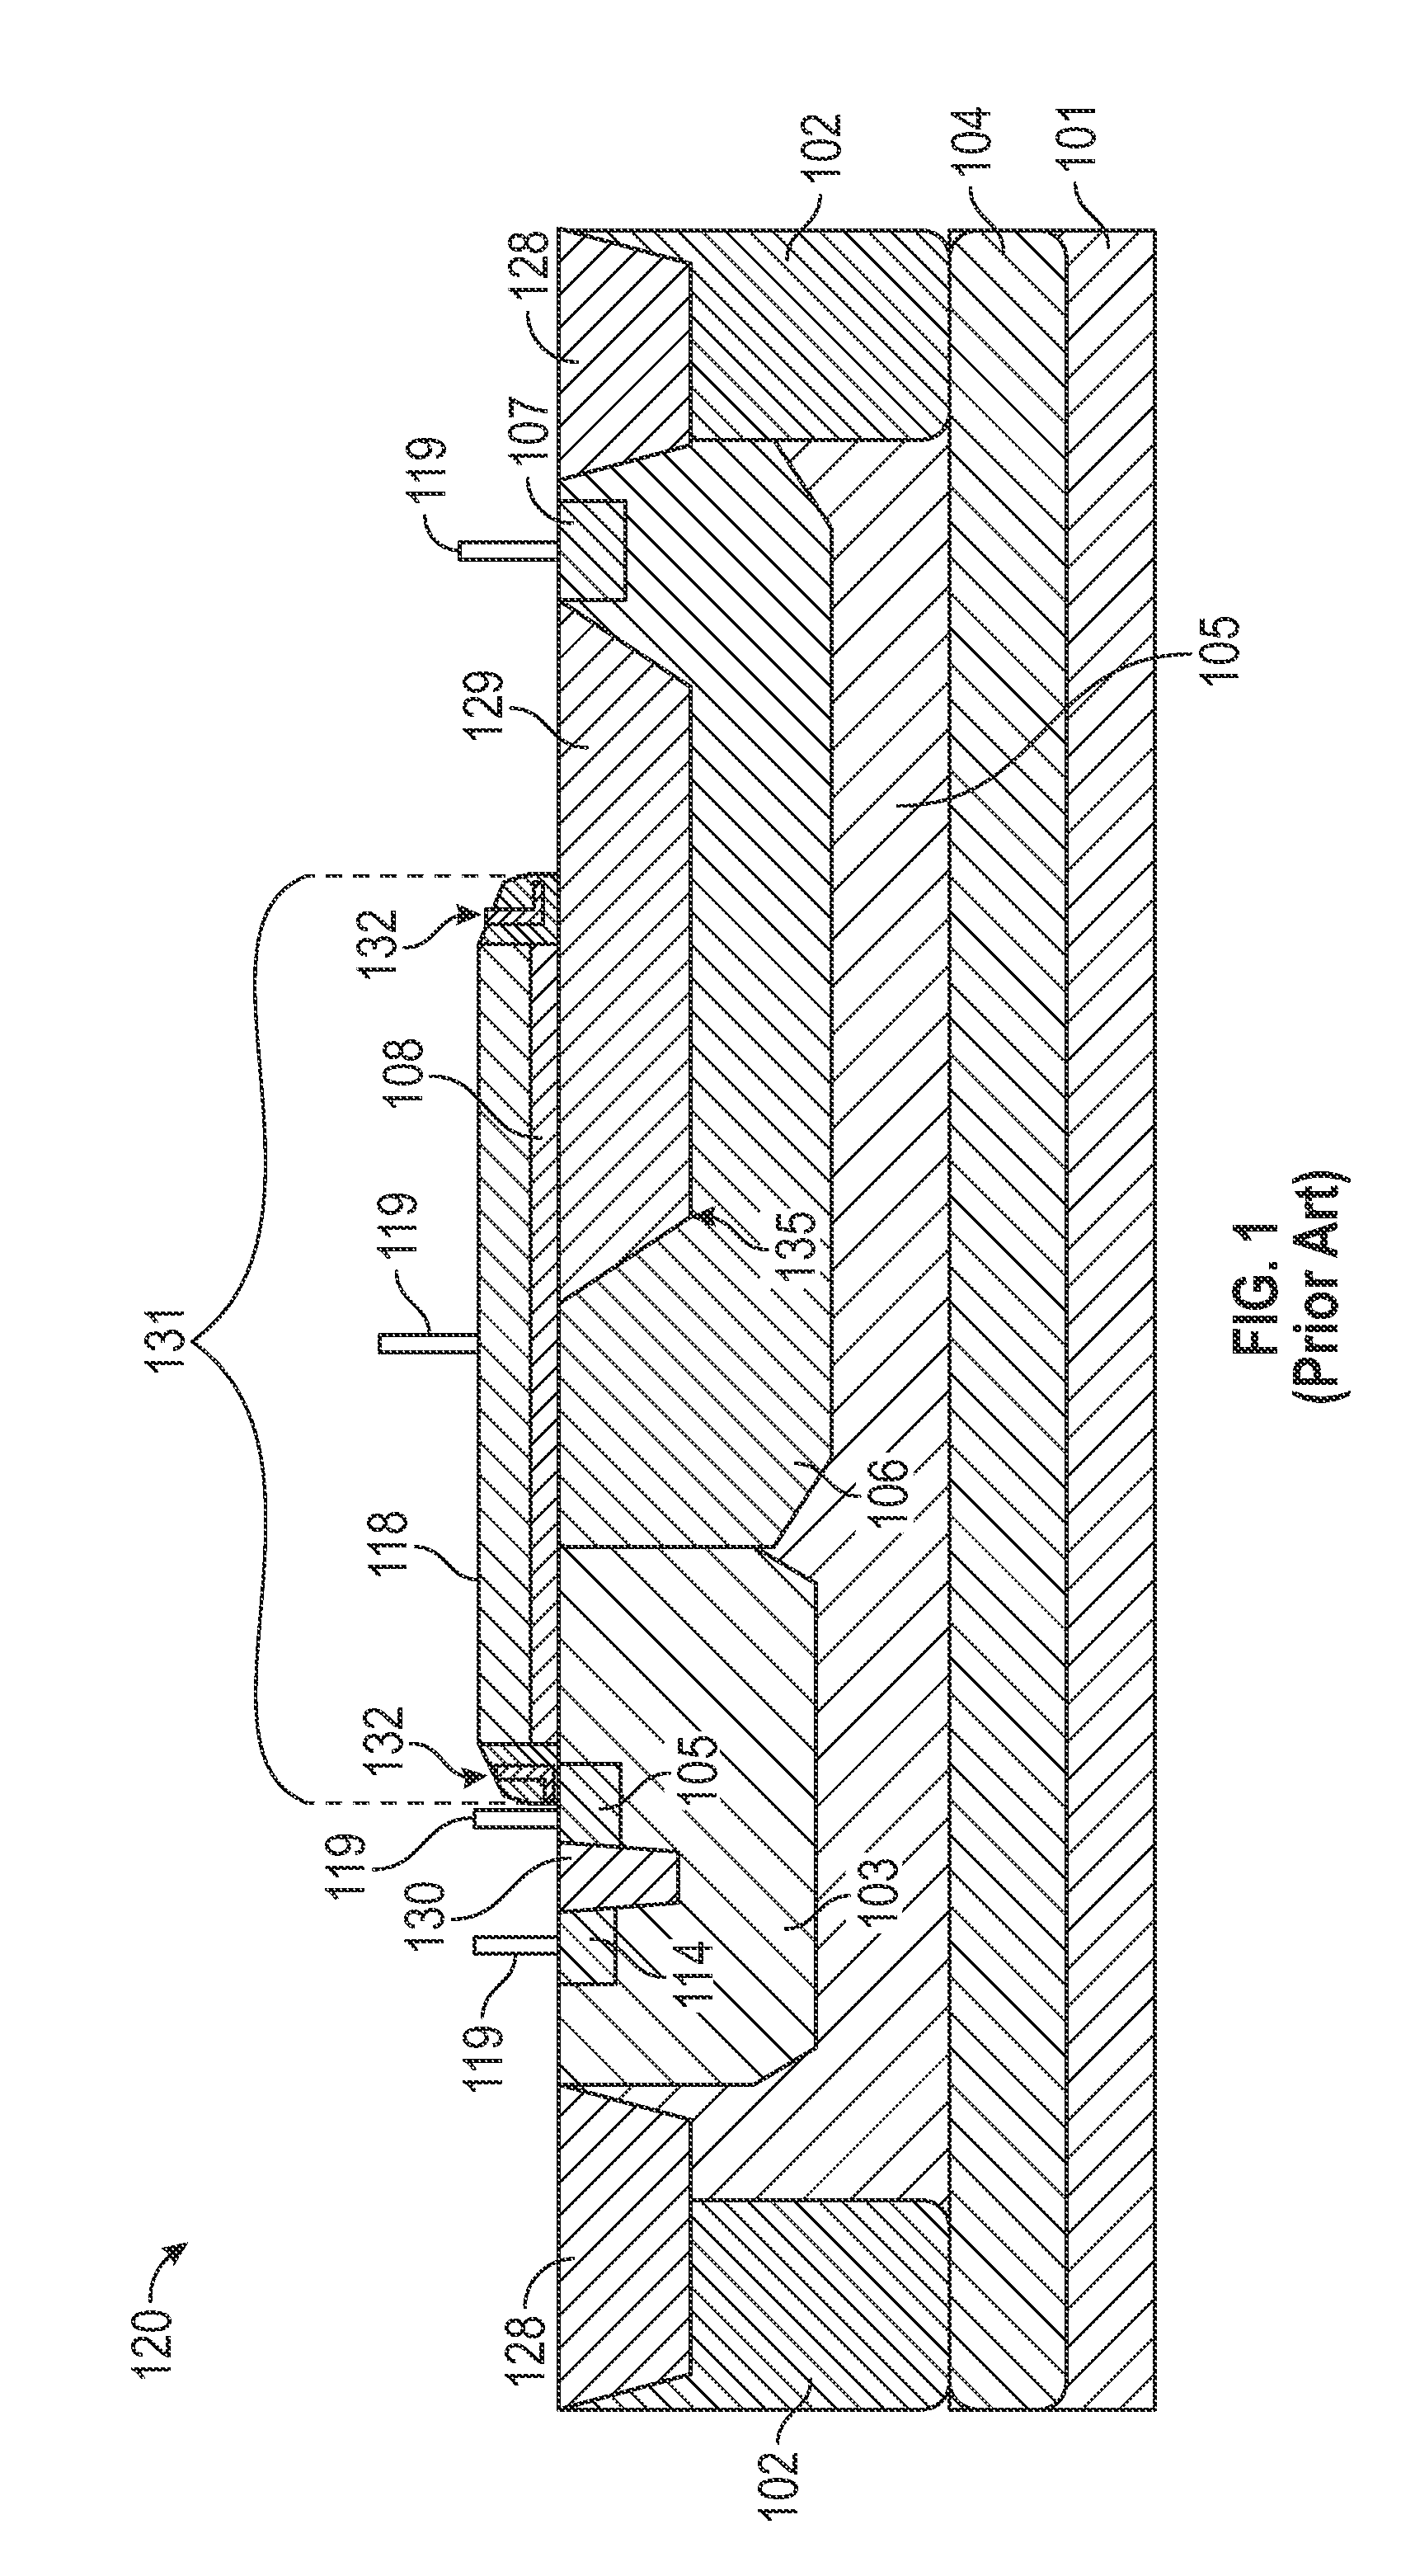 Integrated circuits with laterally diffused metal oxide semiconductor structures and methods for fabricating the same